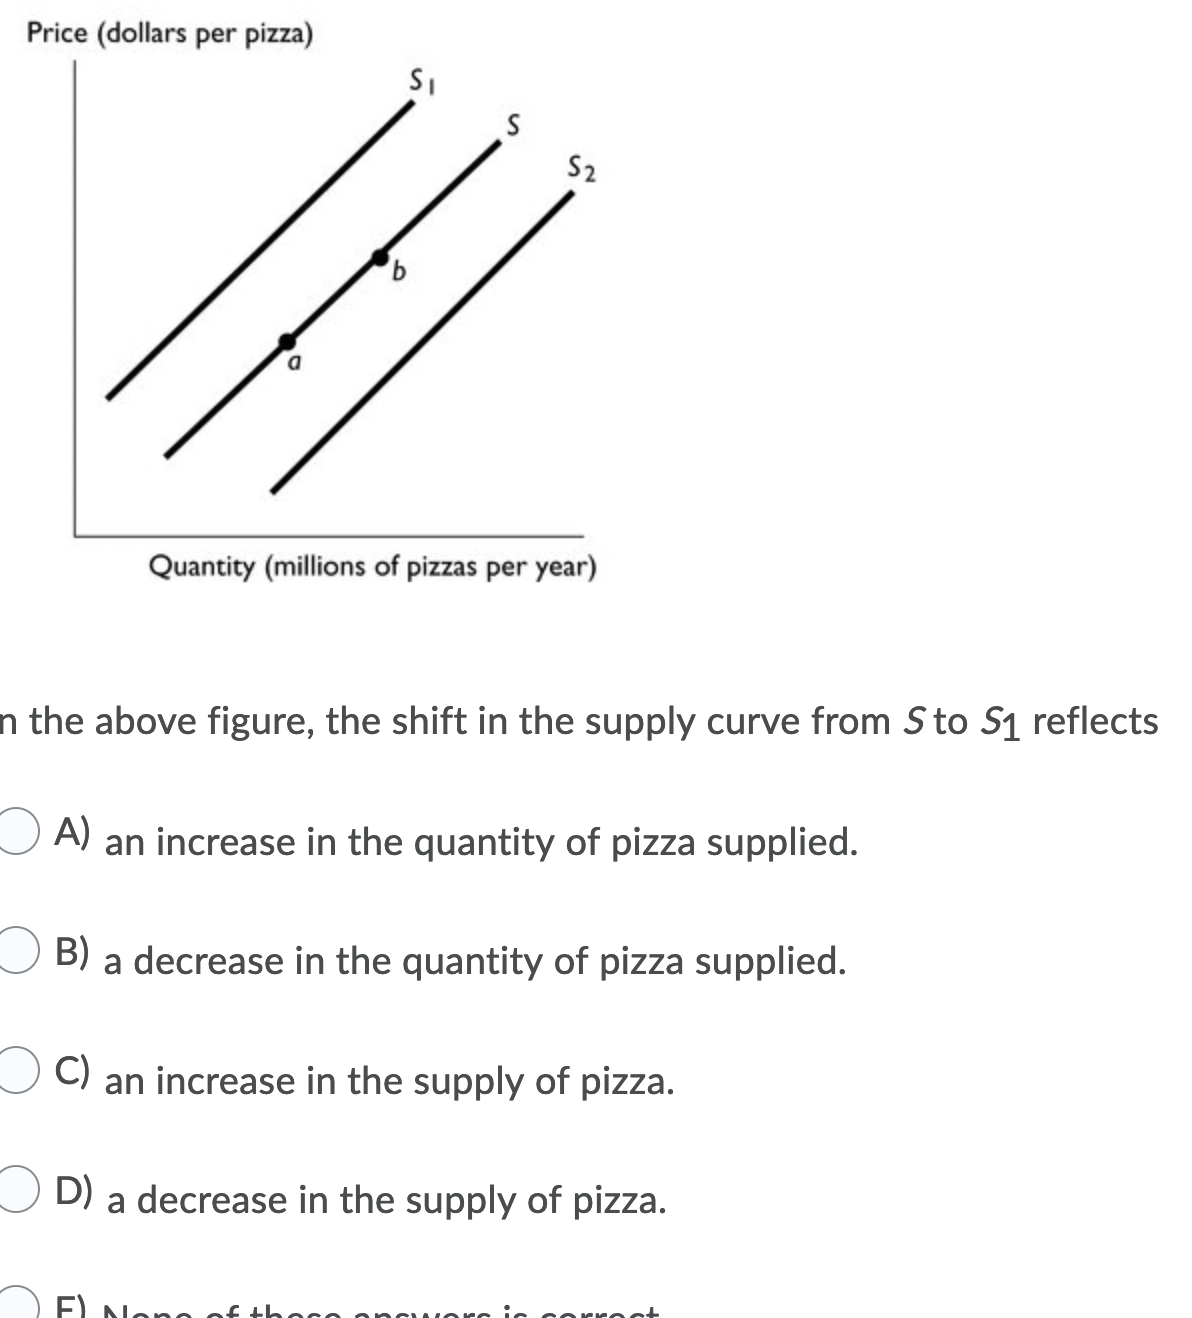 Price (dollars per pizza)
S
S2
Quantity (millions of pizzas per year)
n the above figure, the shift in the supply curve from S to S1 reflects
A)
an increase in the quantity of pizza supplied.
B) a decrease in the quantity of pizza supplied.
C) an increase in the supply of pizza.
D) a decrease in the supply of pizza.
F)
